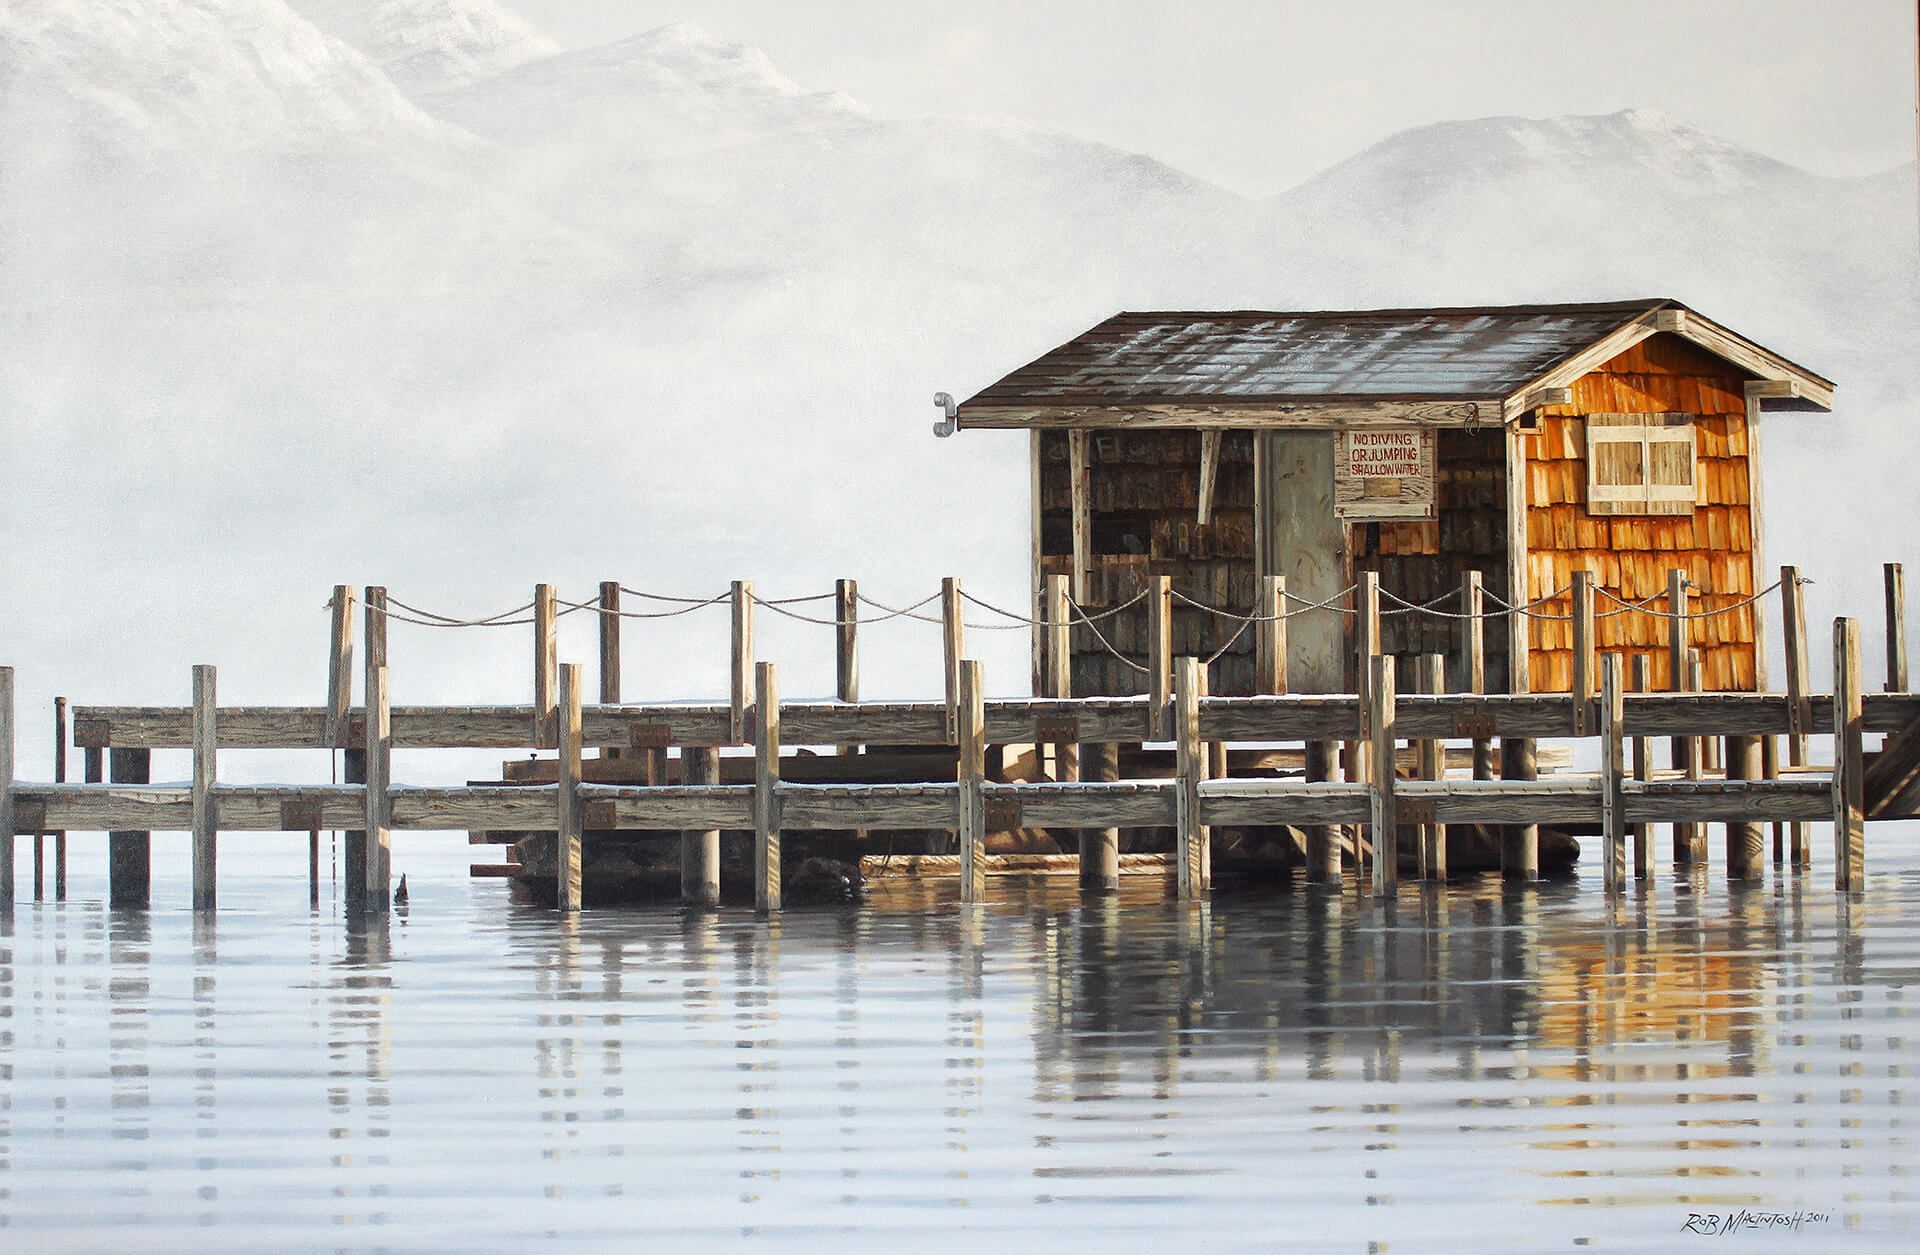 Photorealistic painting of a hut built on the pier on a lake